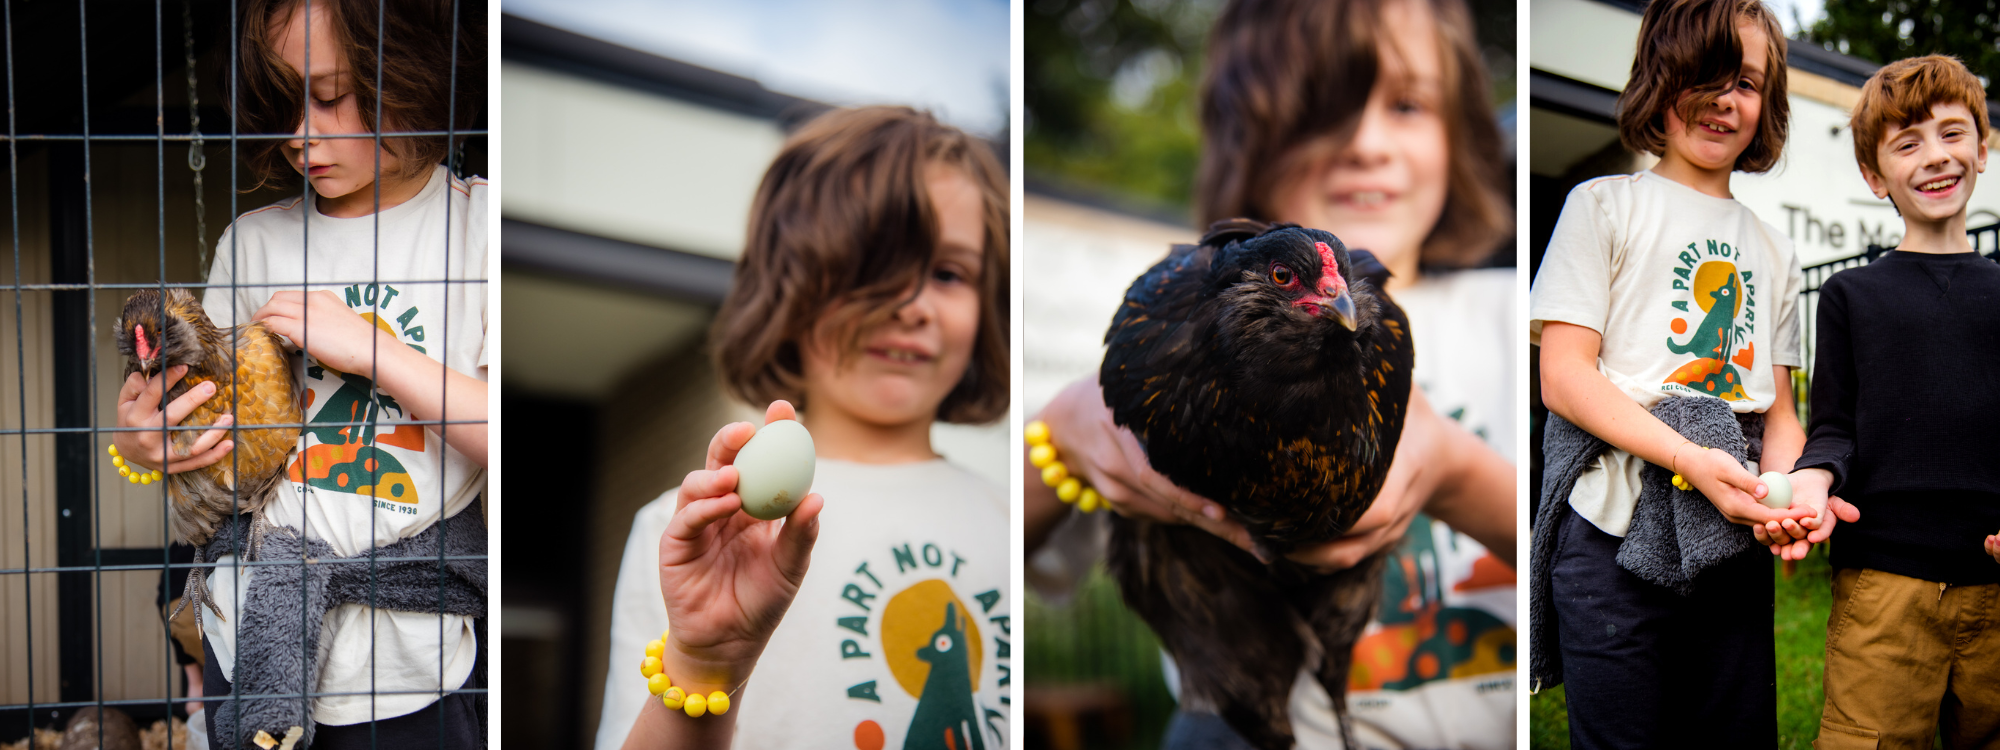 This section has four images of the same child. First, the child is inside of the chicken pen holding and petting a children on the left side of their body. Next is the same child standing outside of the school holding an egg up to the camera. Third, the child is holding a mainly black chicken out to the camera with the chicken in focus. Last, we see two students standing next to one another and jointly holding two eggs while smiling outdoors.